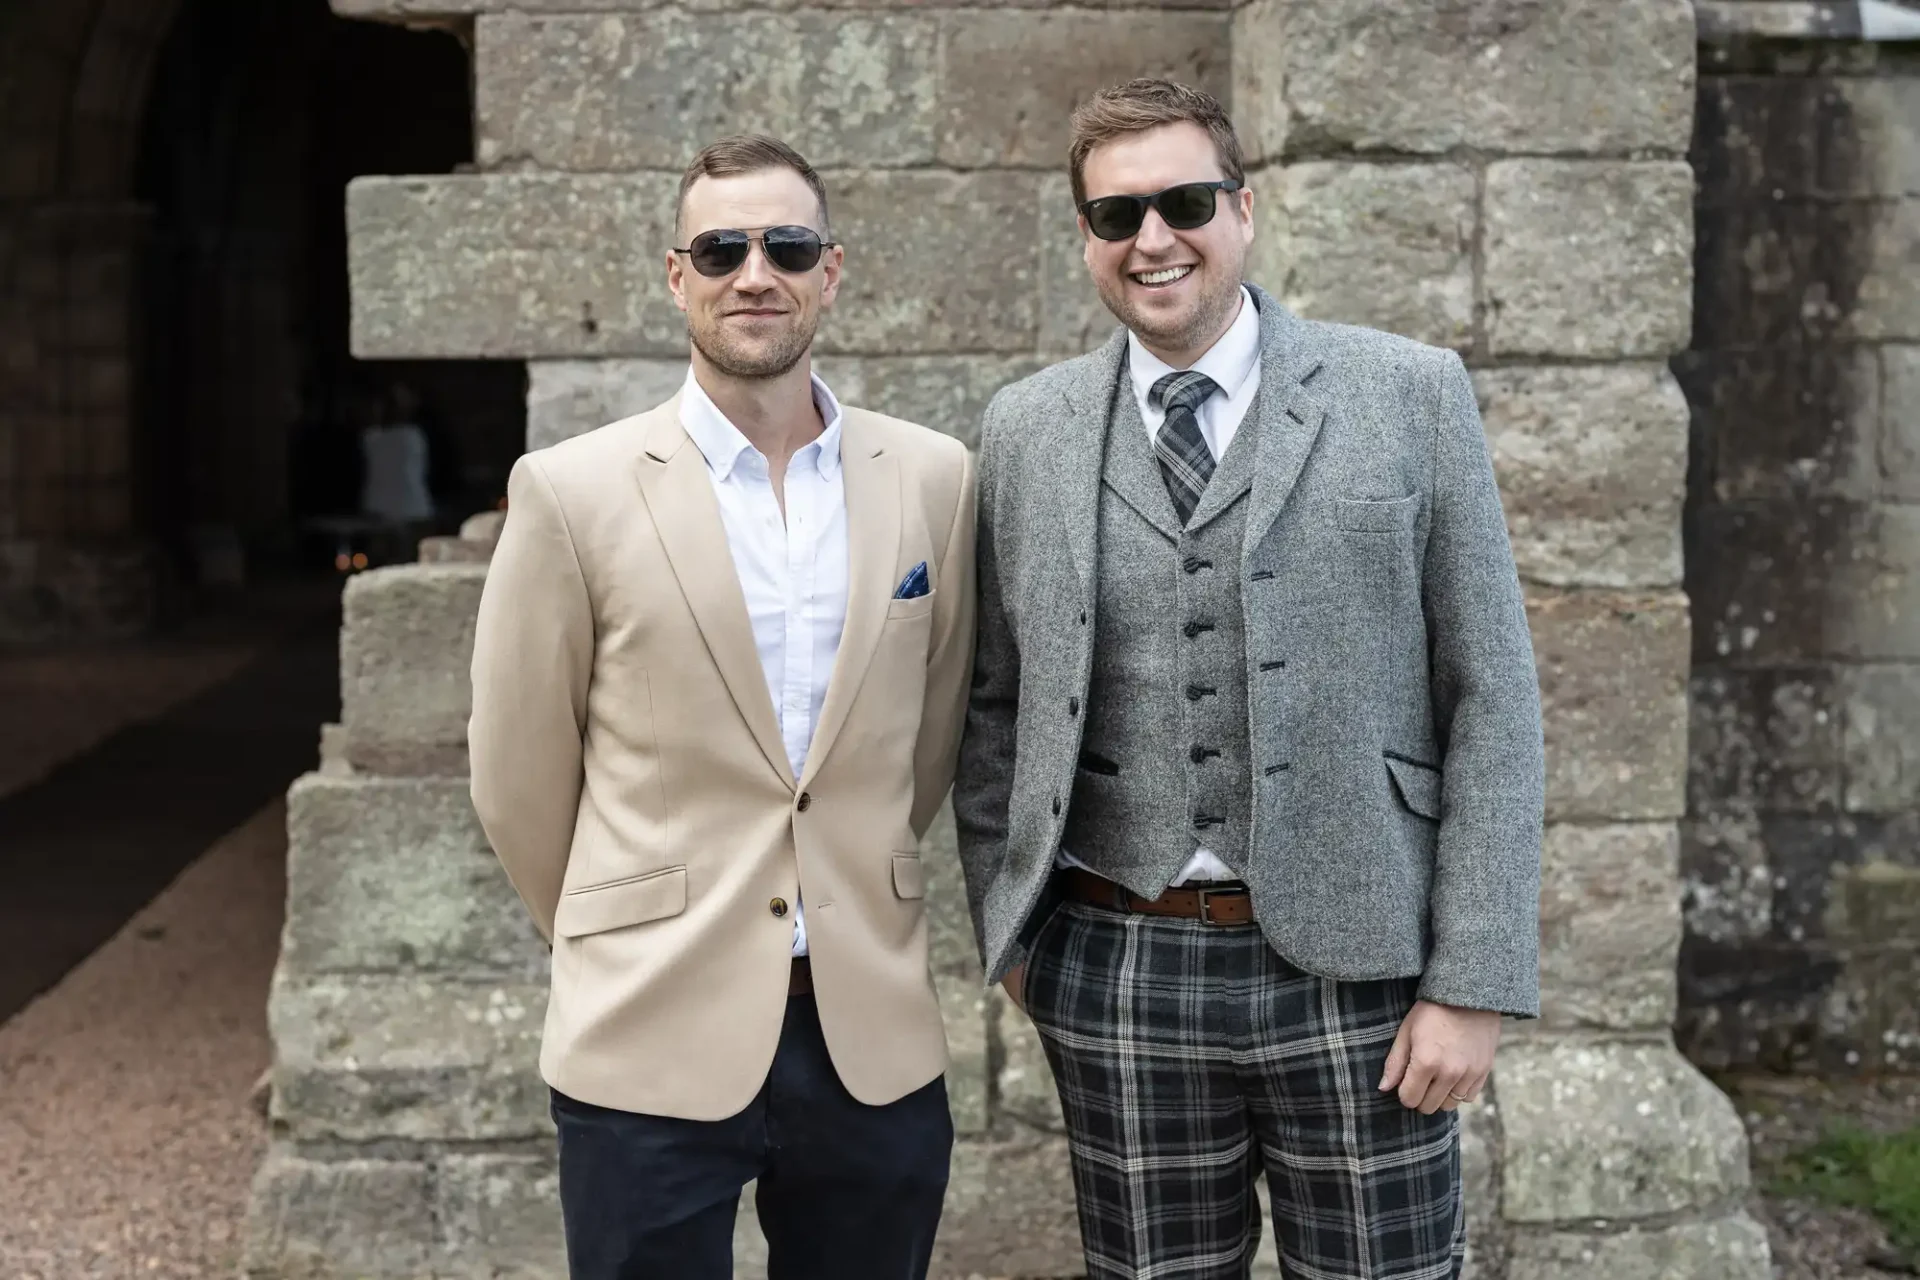 Two men smiling, one in a tan blazer and sunglasses, the other in a gray tweed jacket and plaid trousers, standing in front of a stone wall.